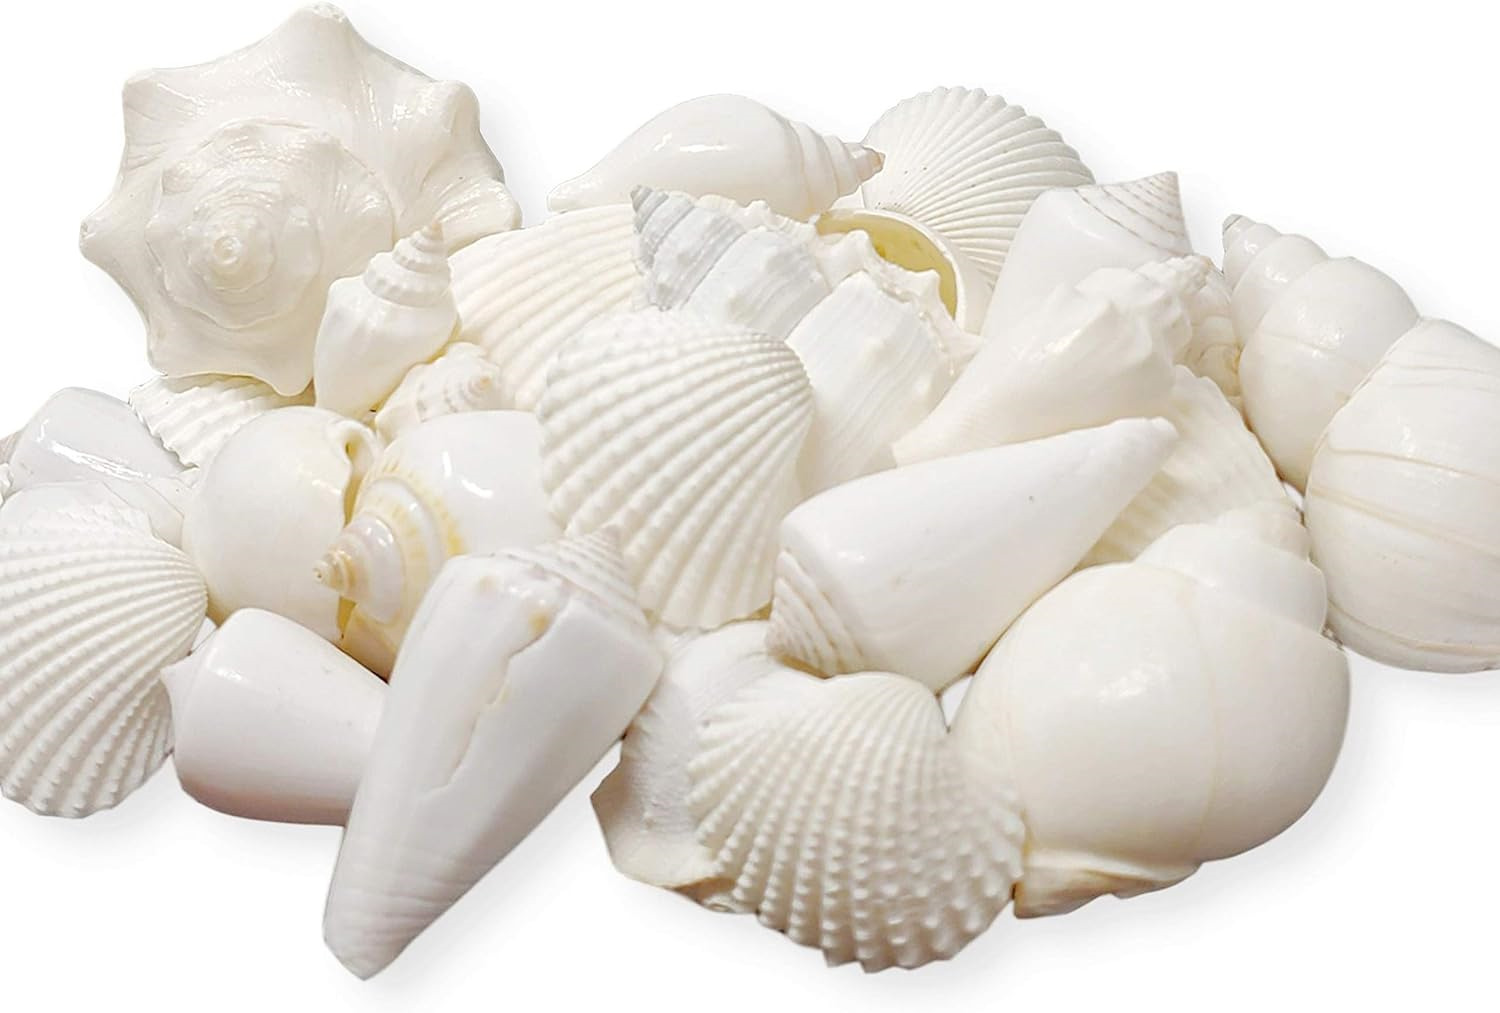 Mix of White Seashells - Set includes 1 Pound White Shells up to 3 inches - Home